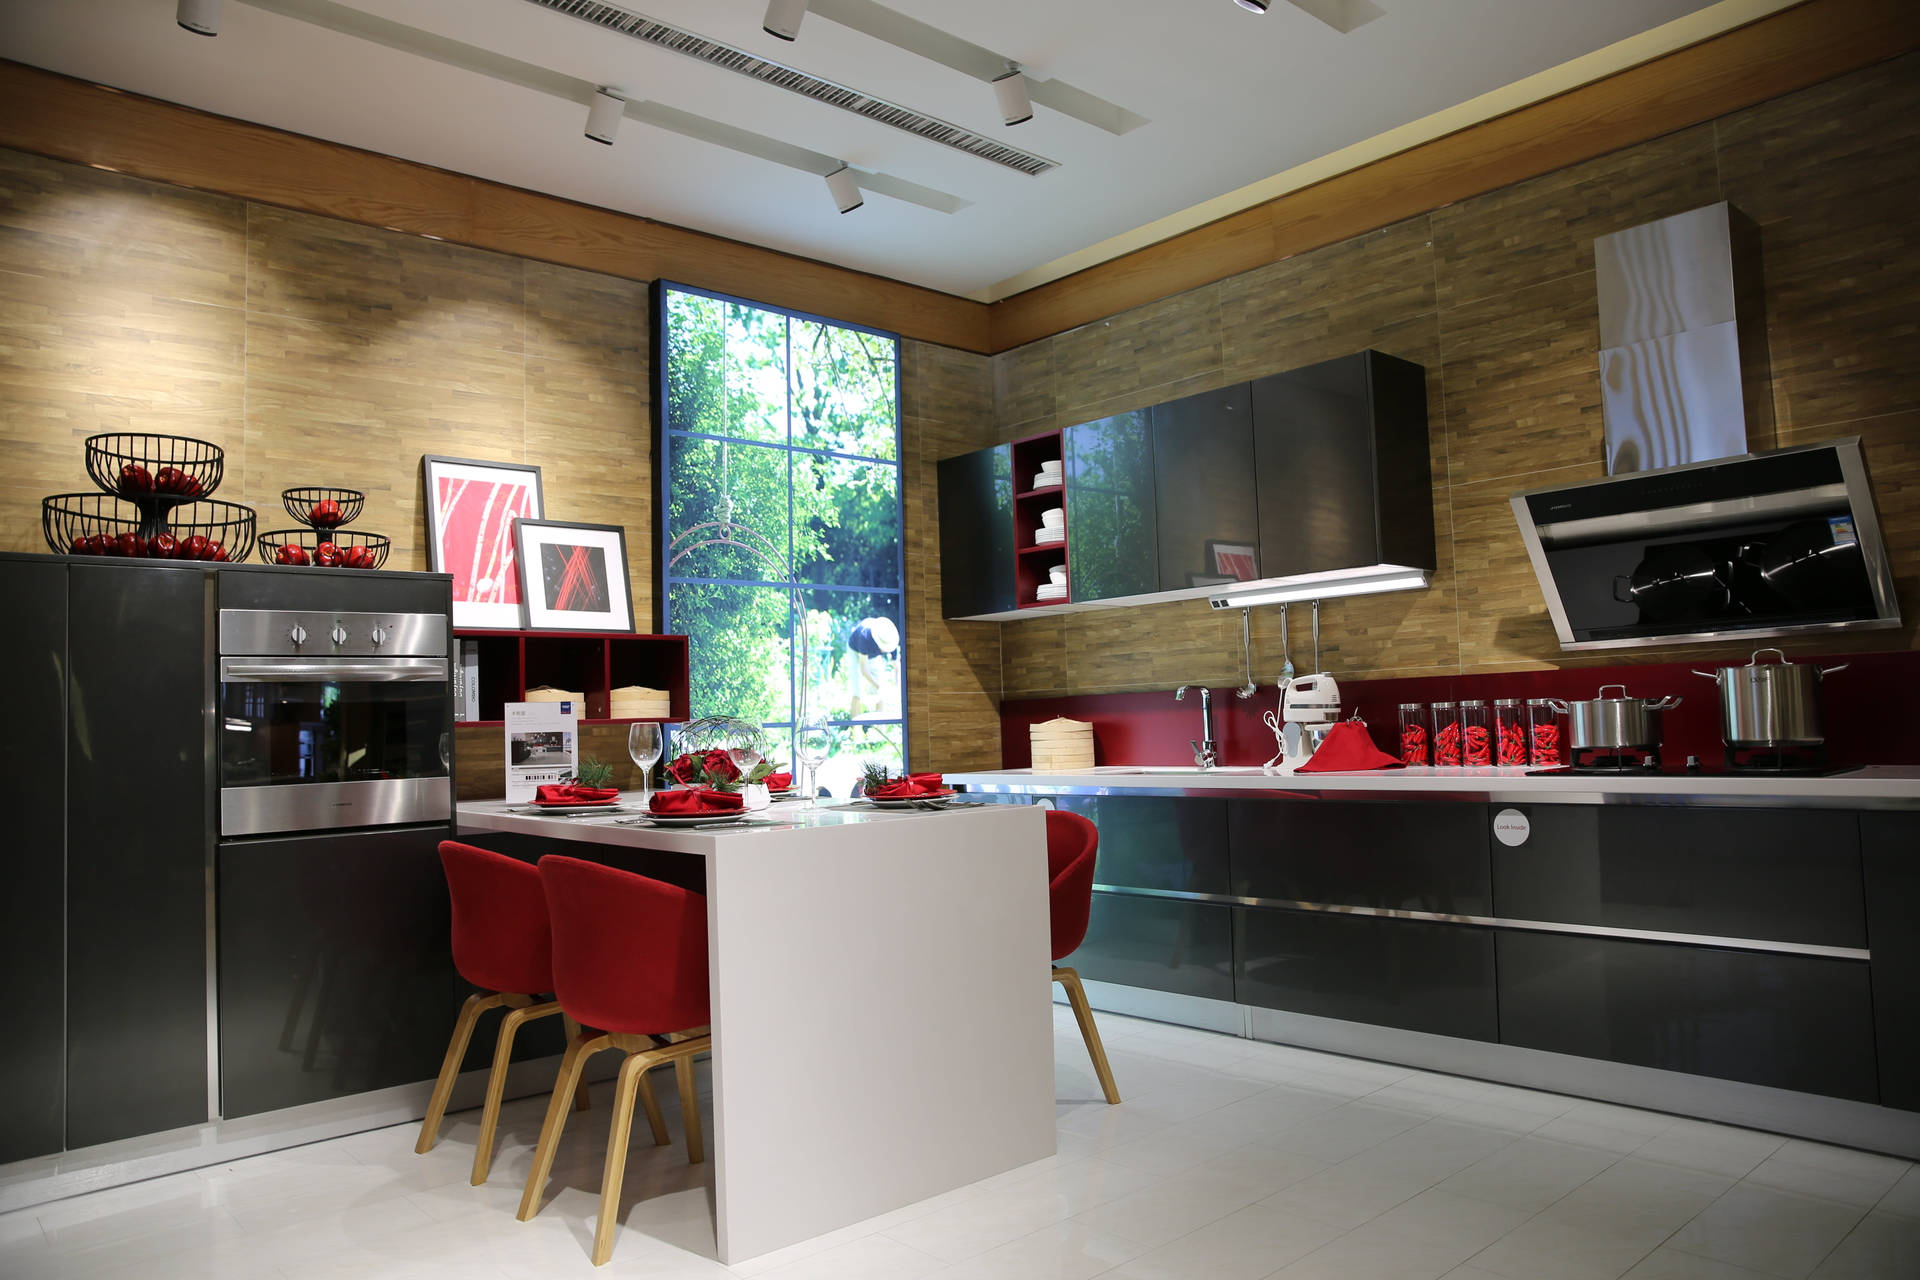 Kitchen Design With Red Accents Wallpaper